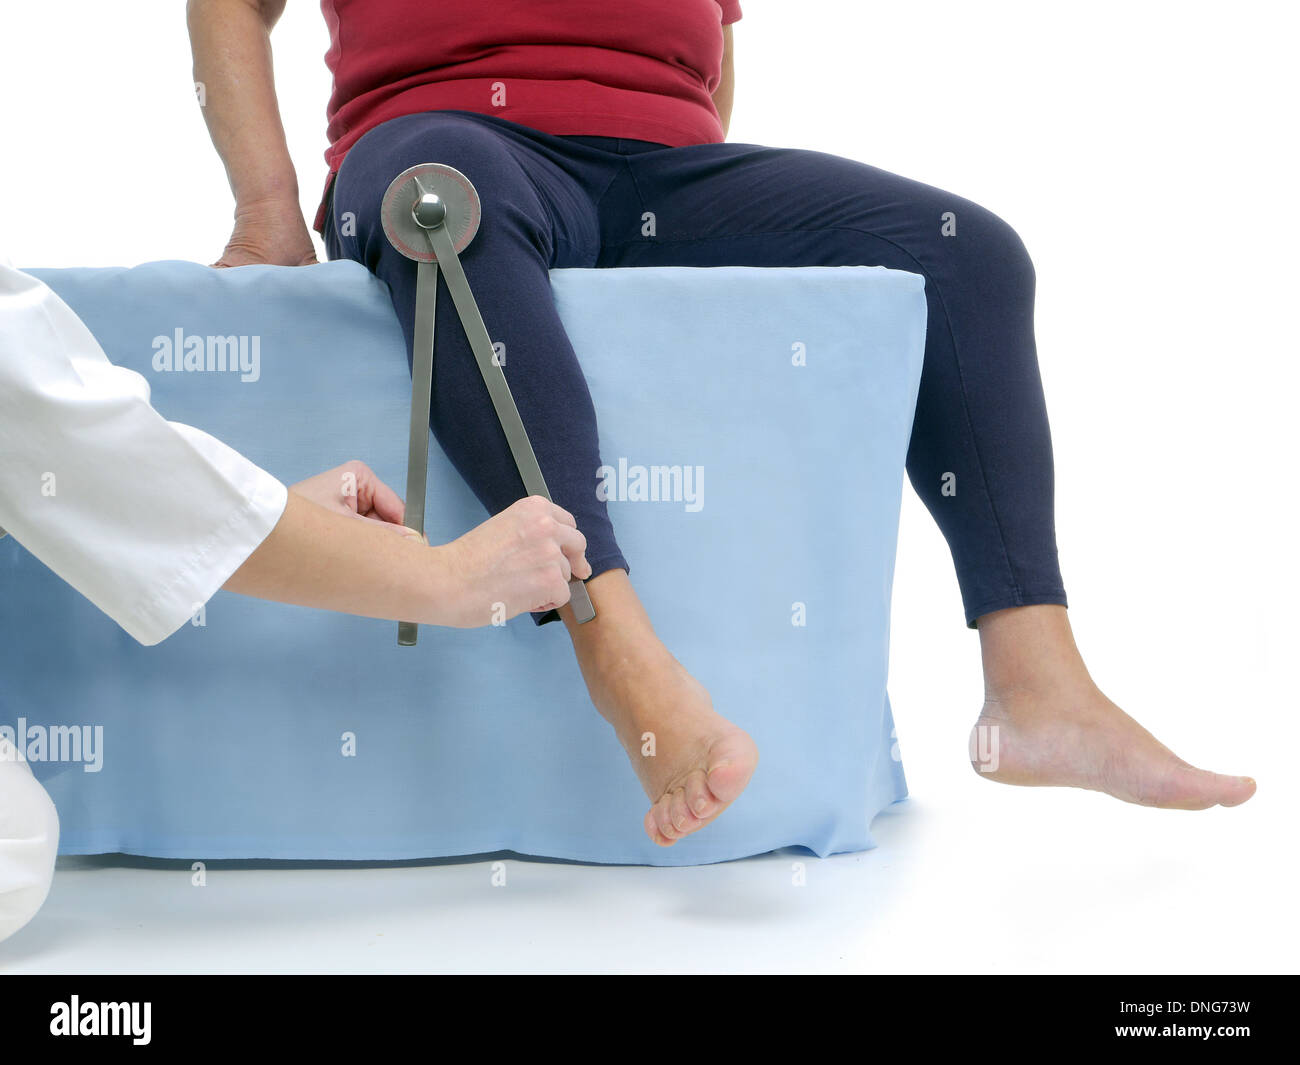 Physiotherapist measuring active range of motion of older patient's lower limb using manual goniometer Stock Photo